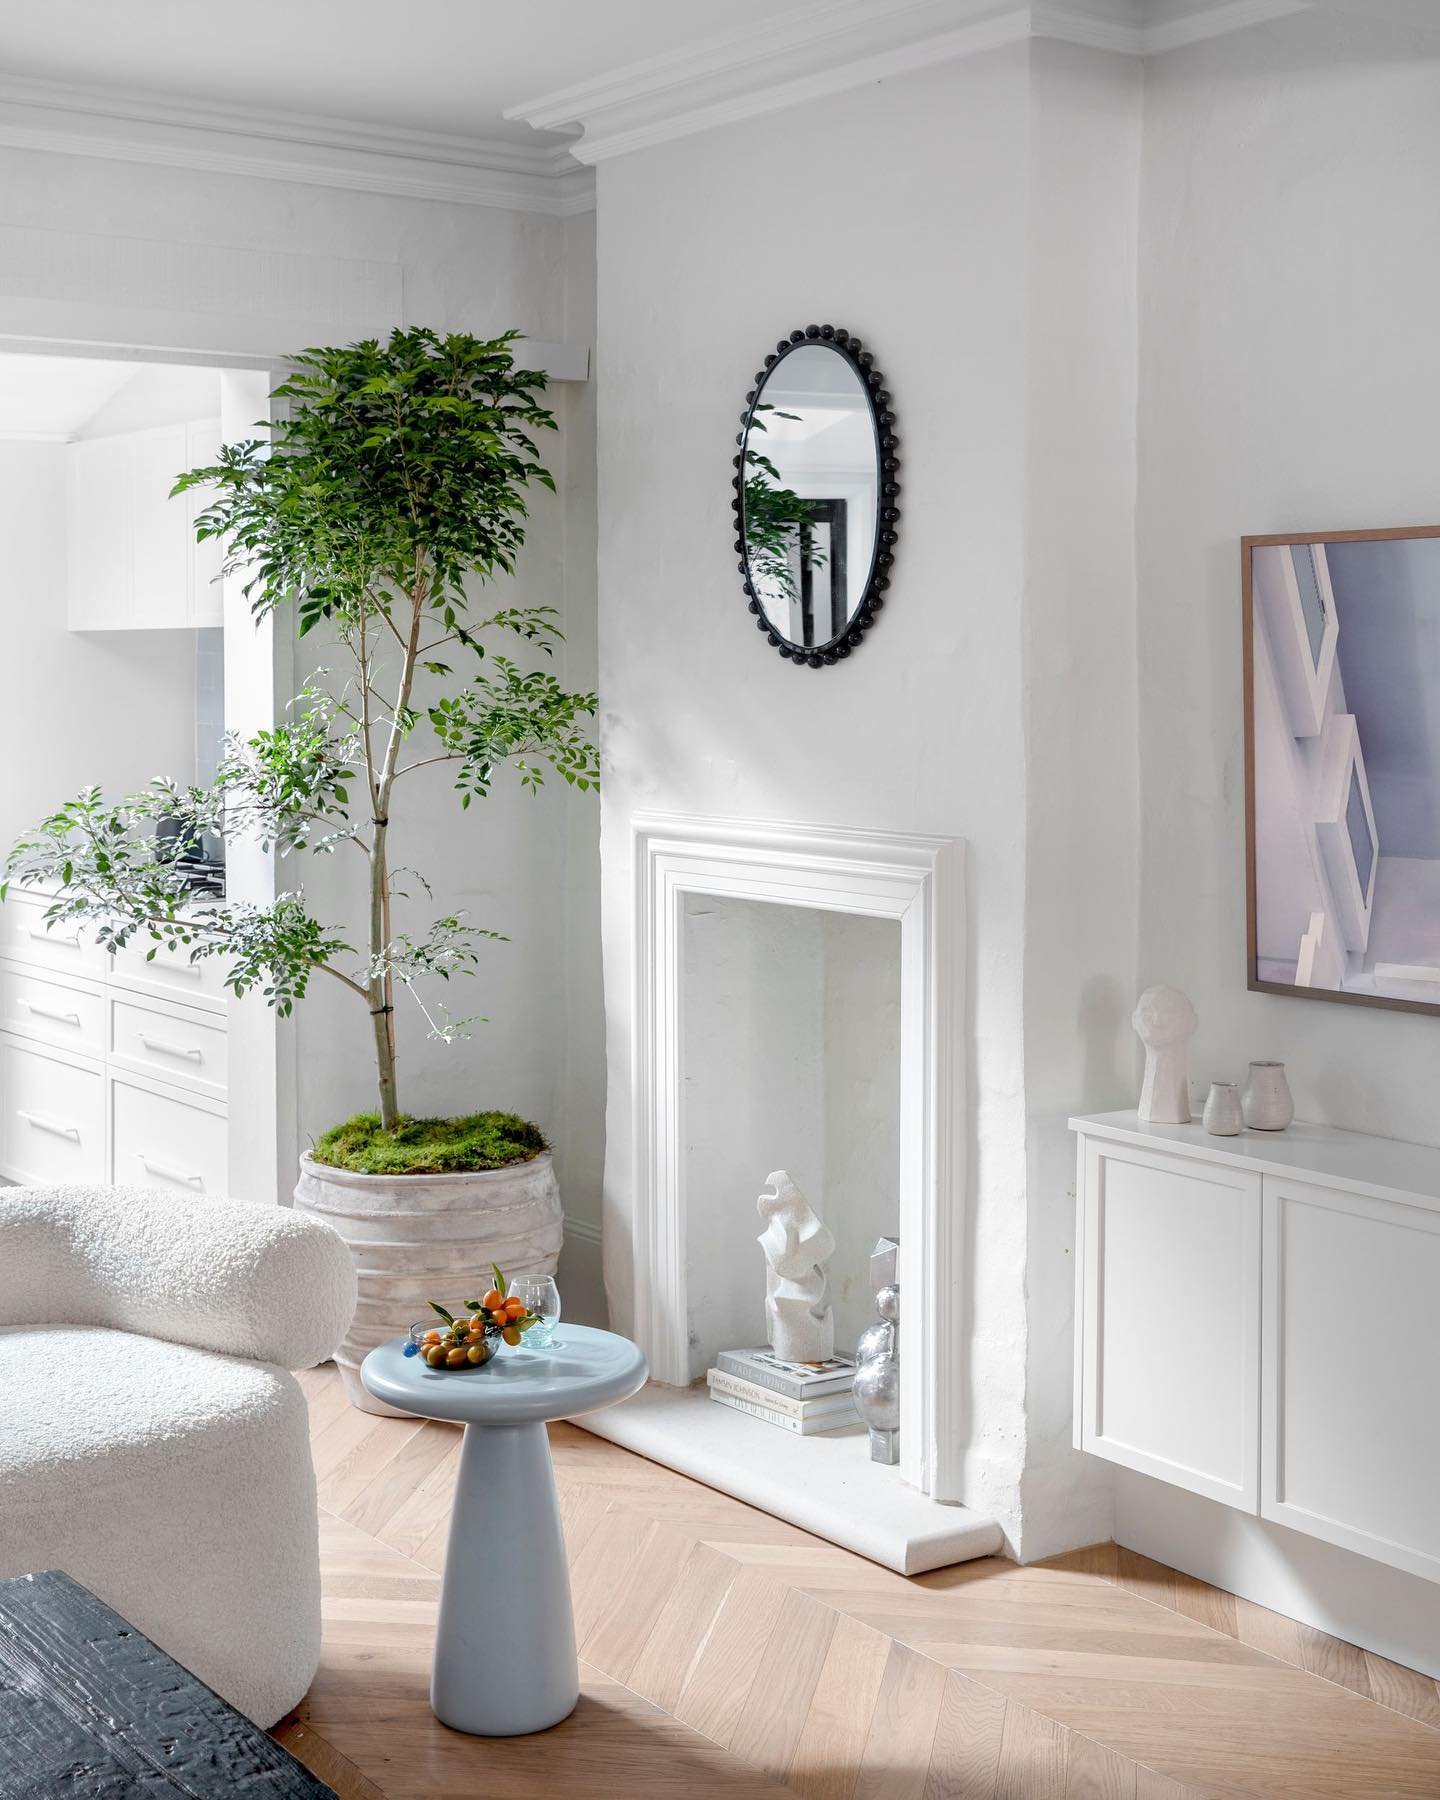 A warm neutral base serves as a great canvas to inject personality with subtle colour pops, greenery and quirky styling.

📸 @lulu_wells 
💁🏼&zwj;♂️ @jono.fleming 
@reallivingmag @homestoloveau 

#homedecor #chevronfloor #neutraldecor #houseplants #